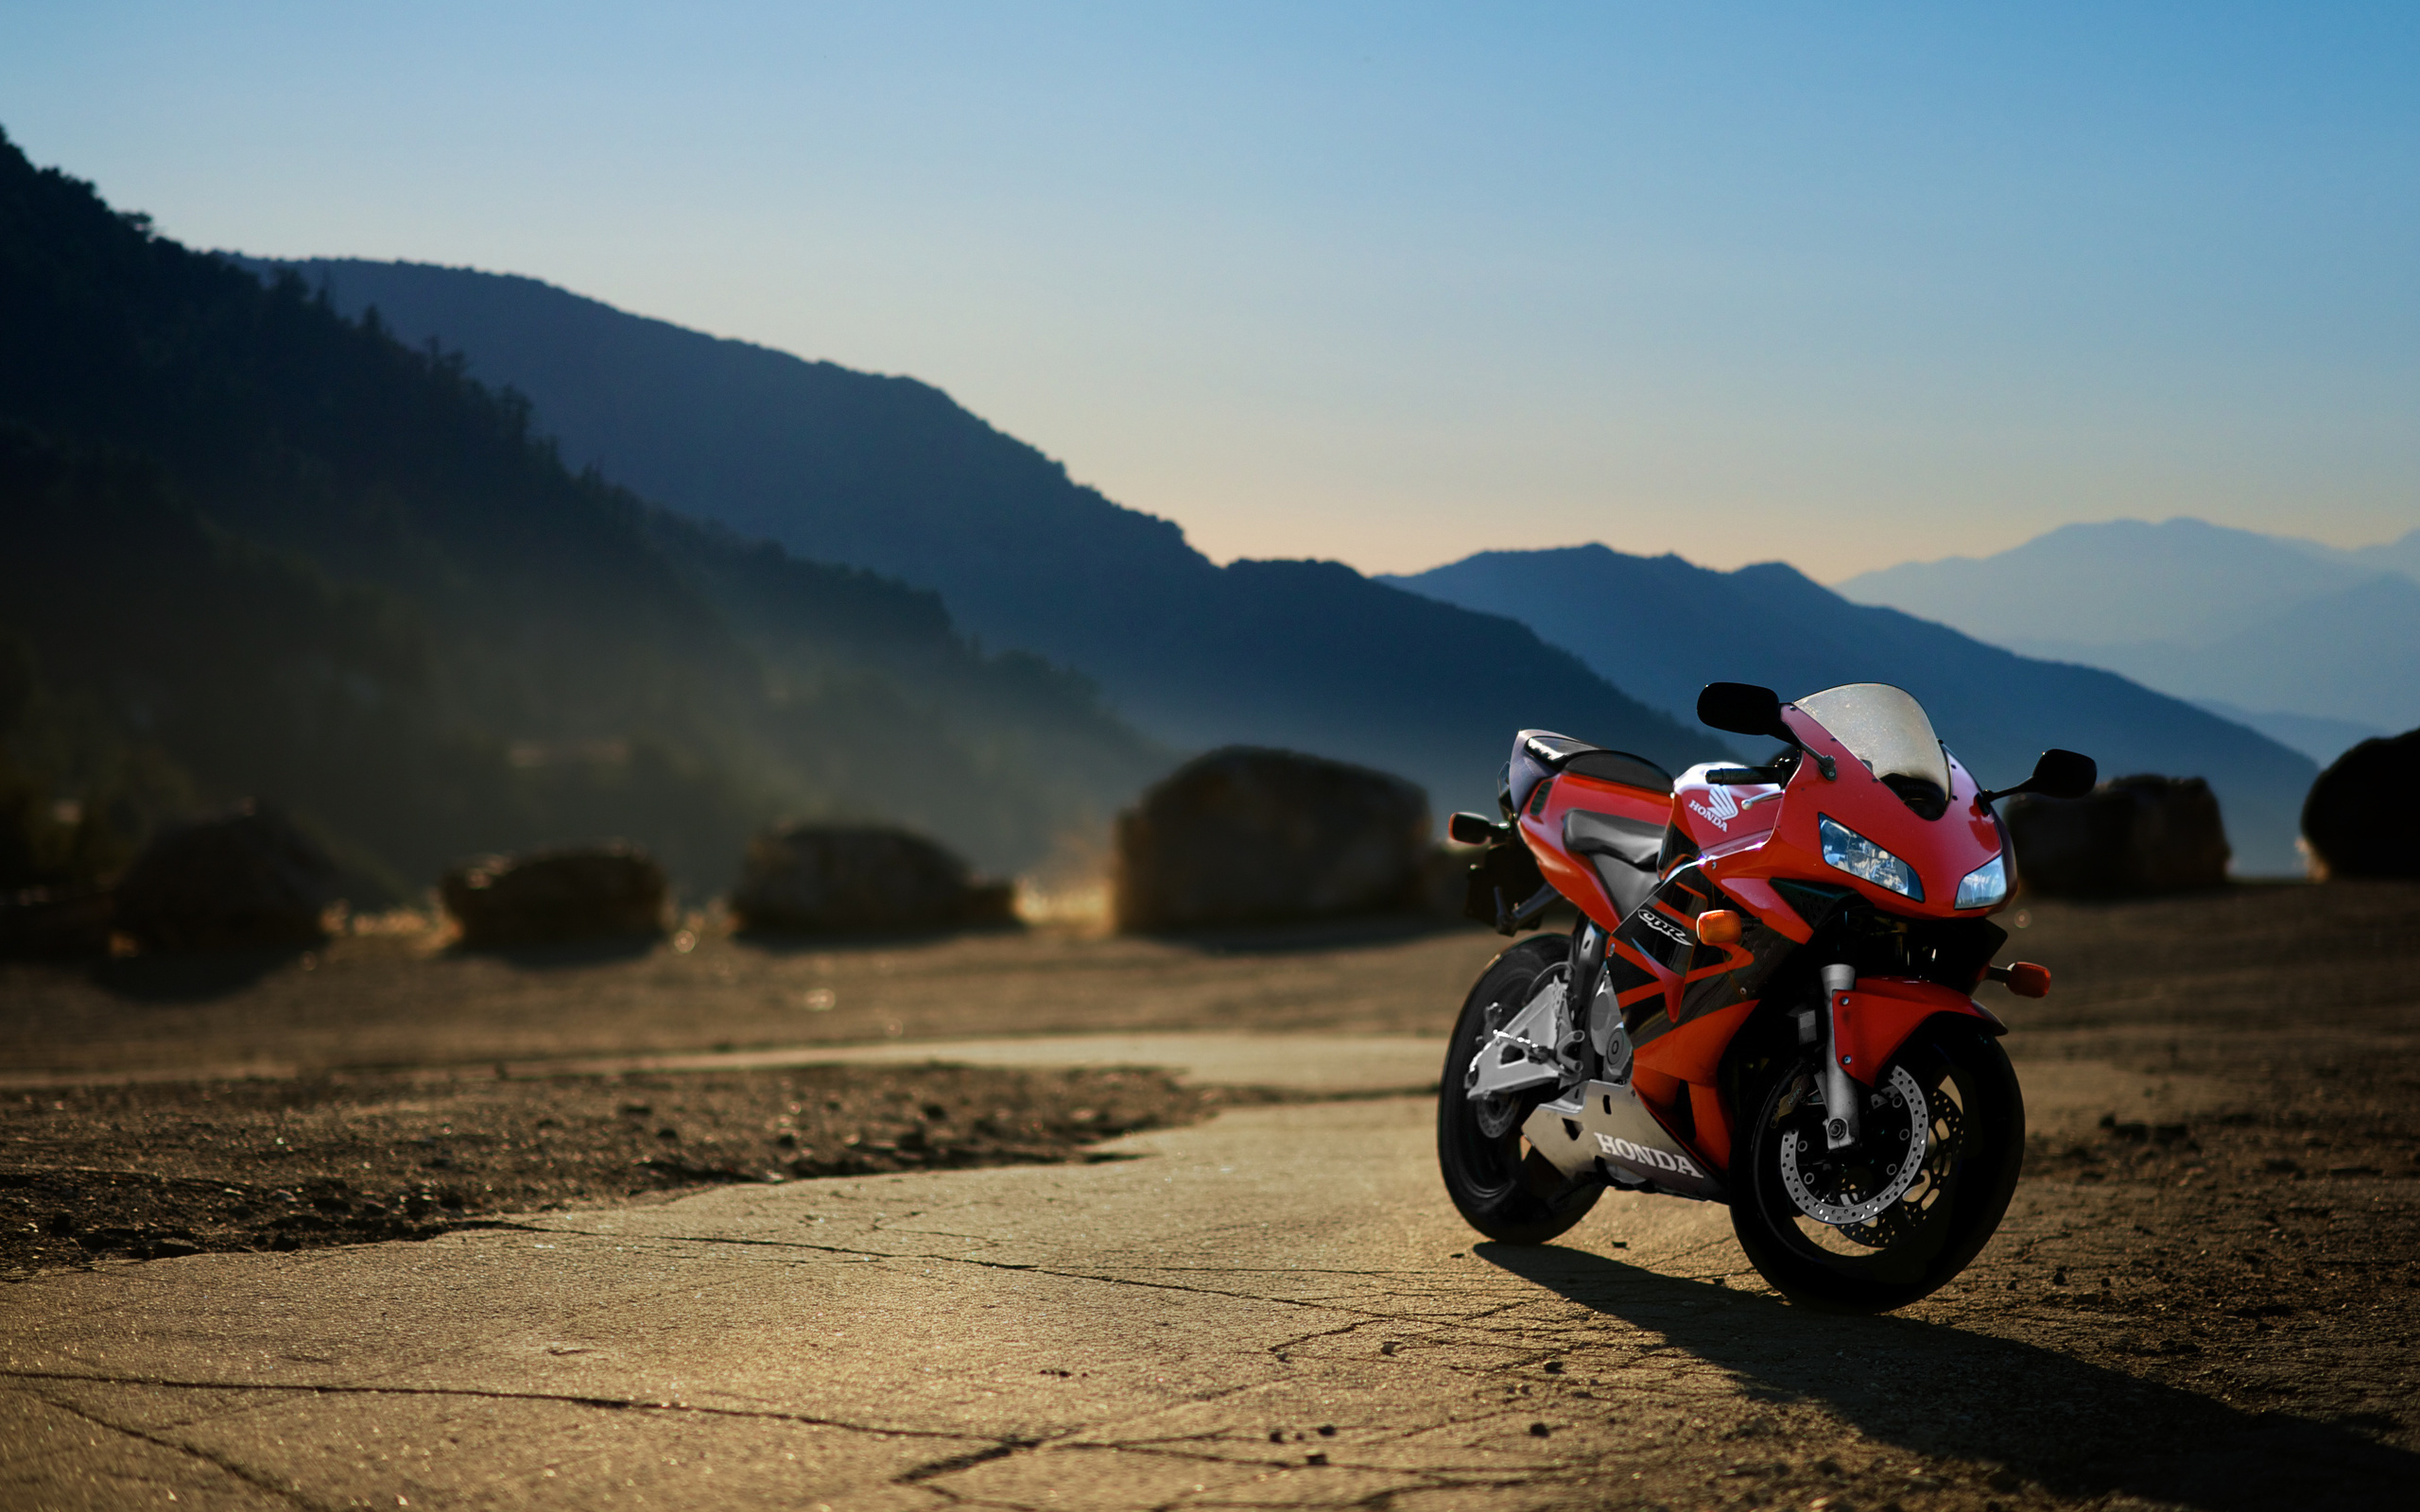 Honda Cbr600rr Red Motorcycle Wallpaper And Stock